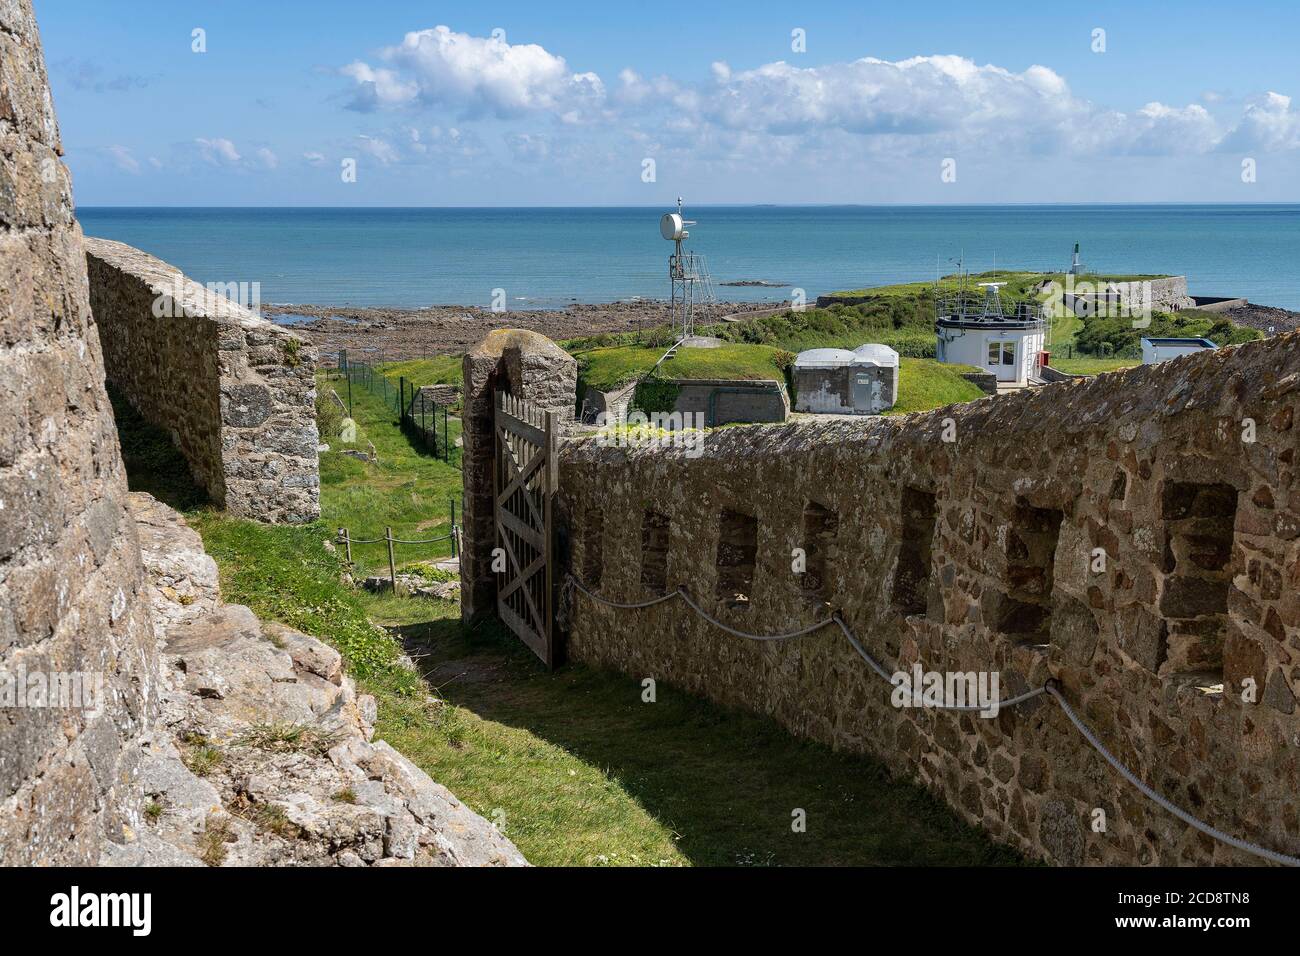 France, Manche, Saint-Vaast la Hougue, the Hougue fortress built by Vauban, listed as World Heritage by UNESCO Stock Photo